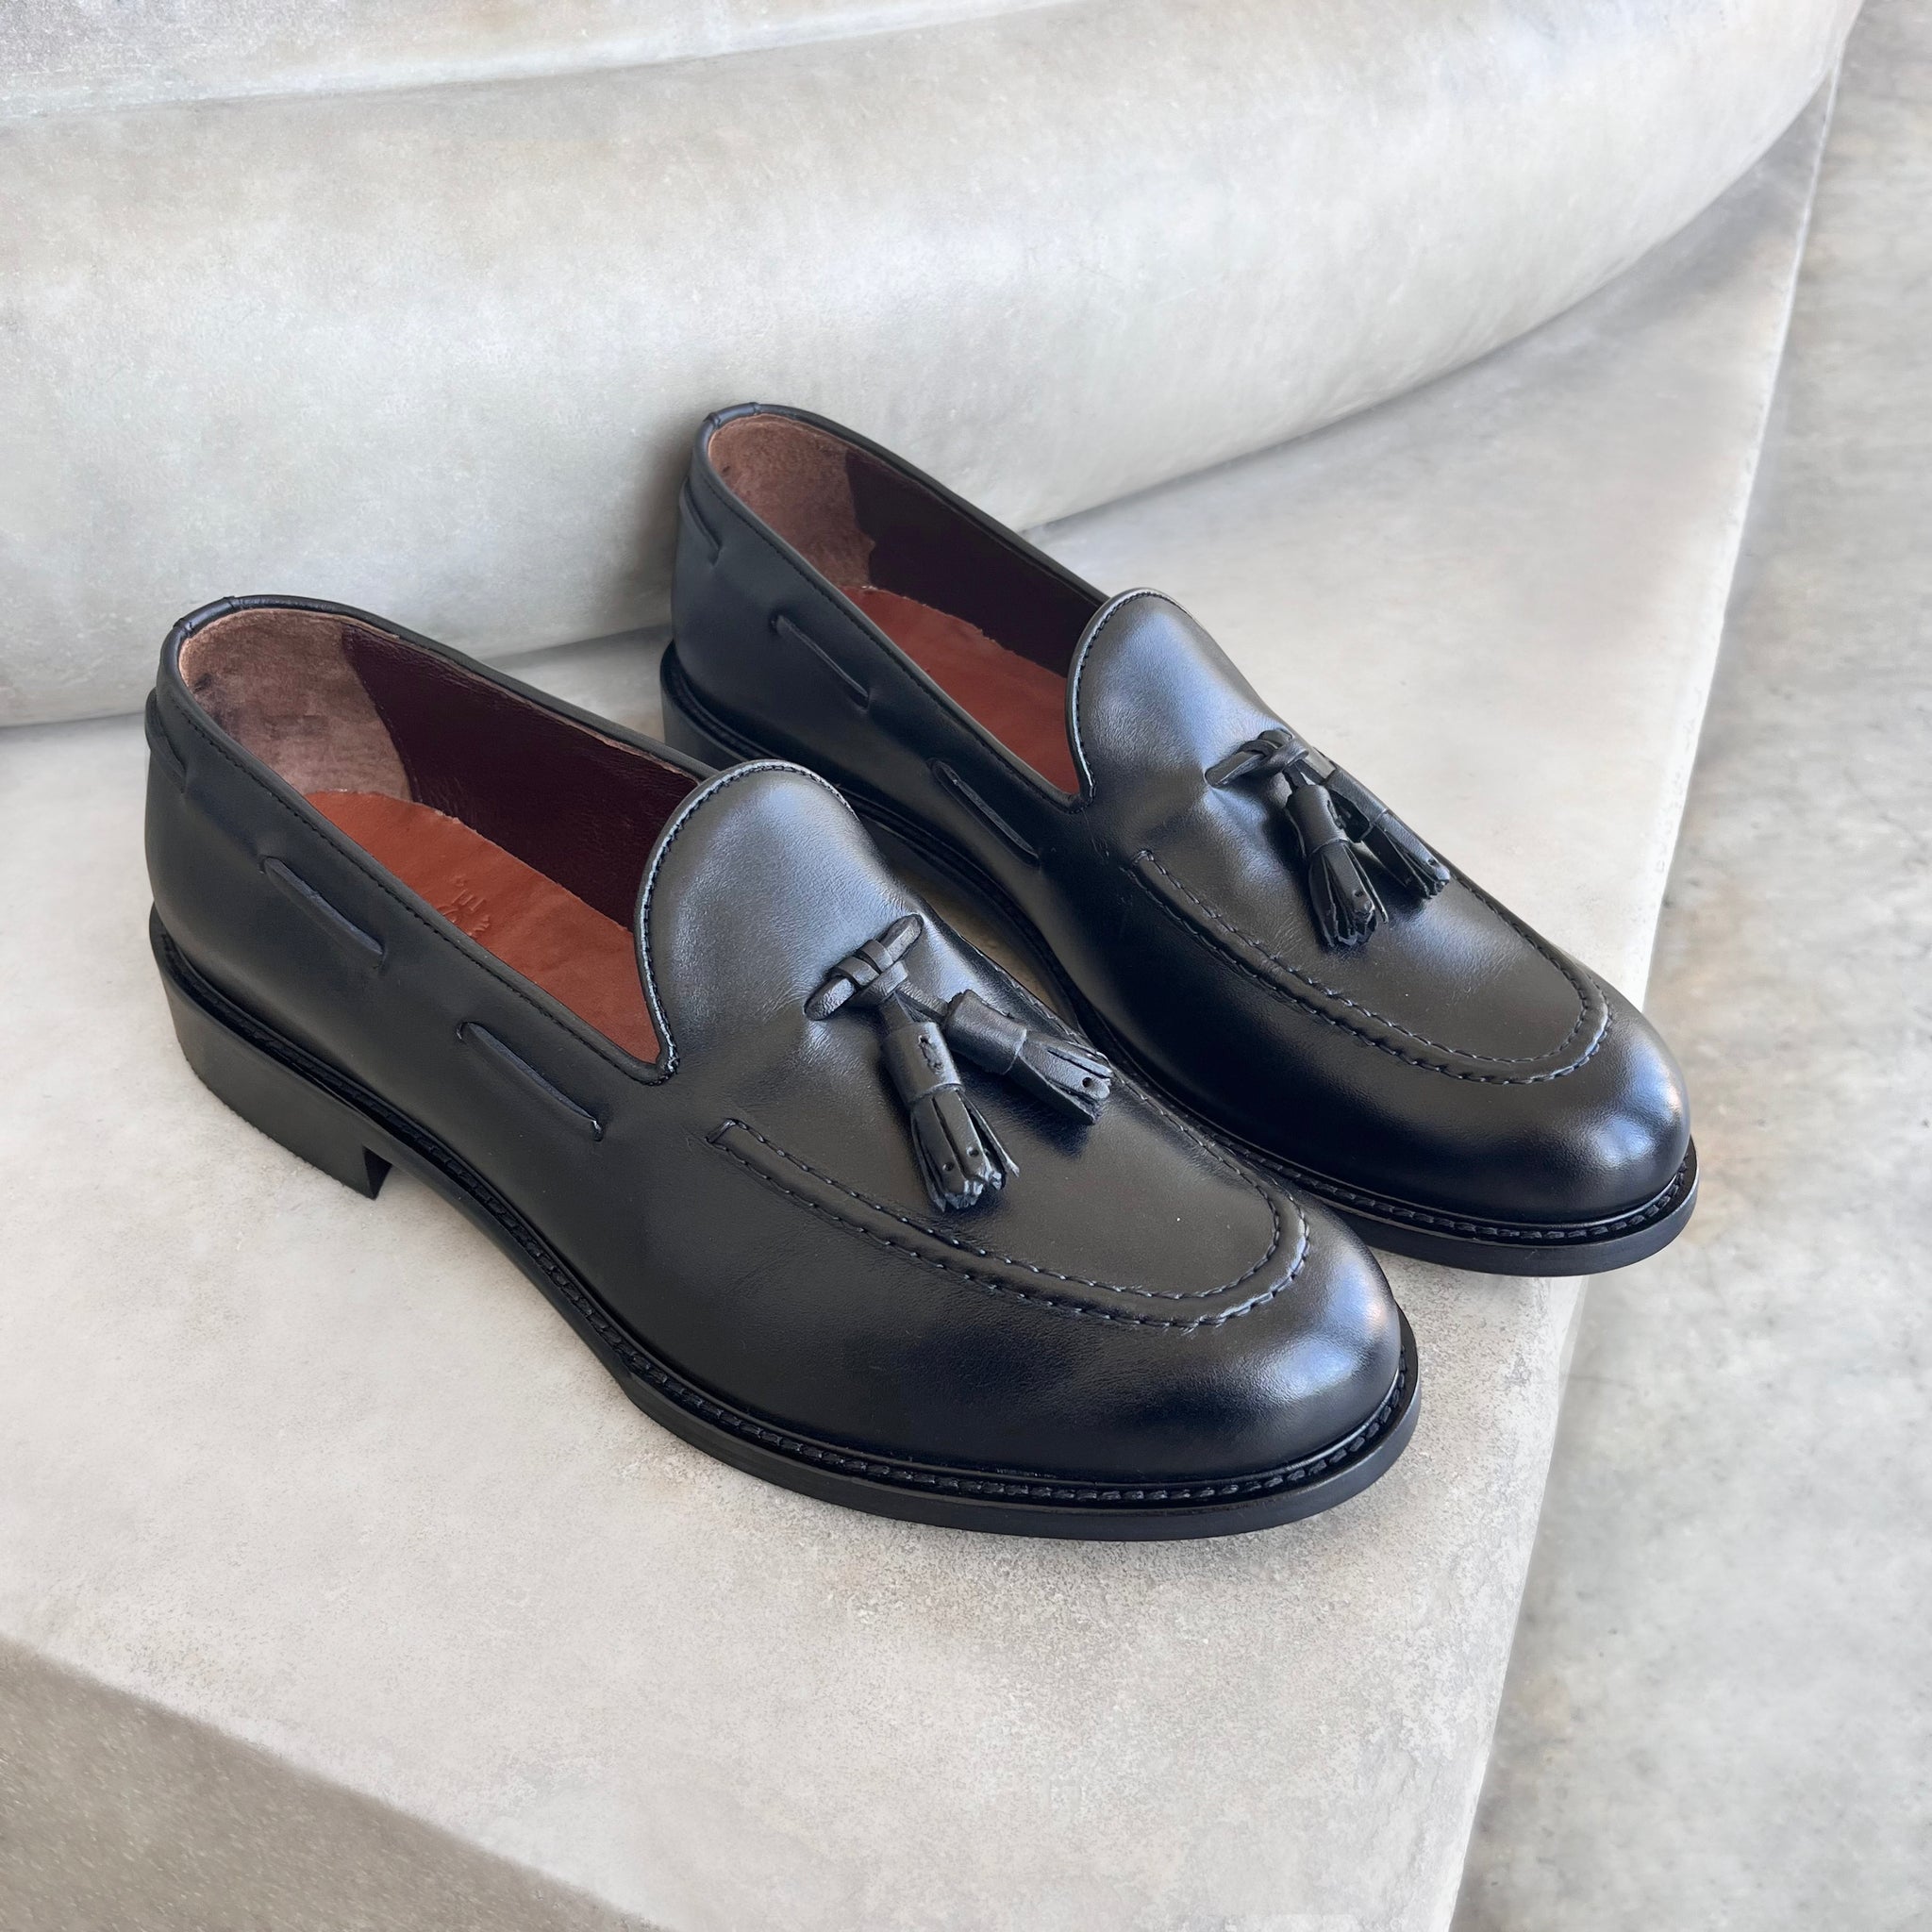 Black leather slippers for man